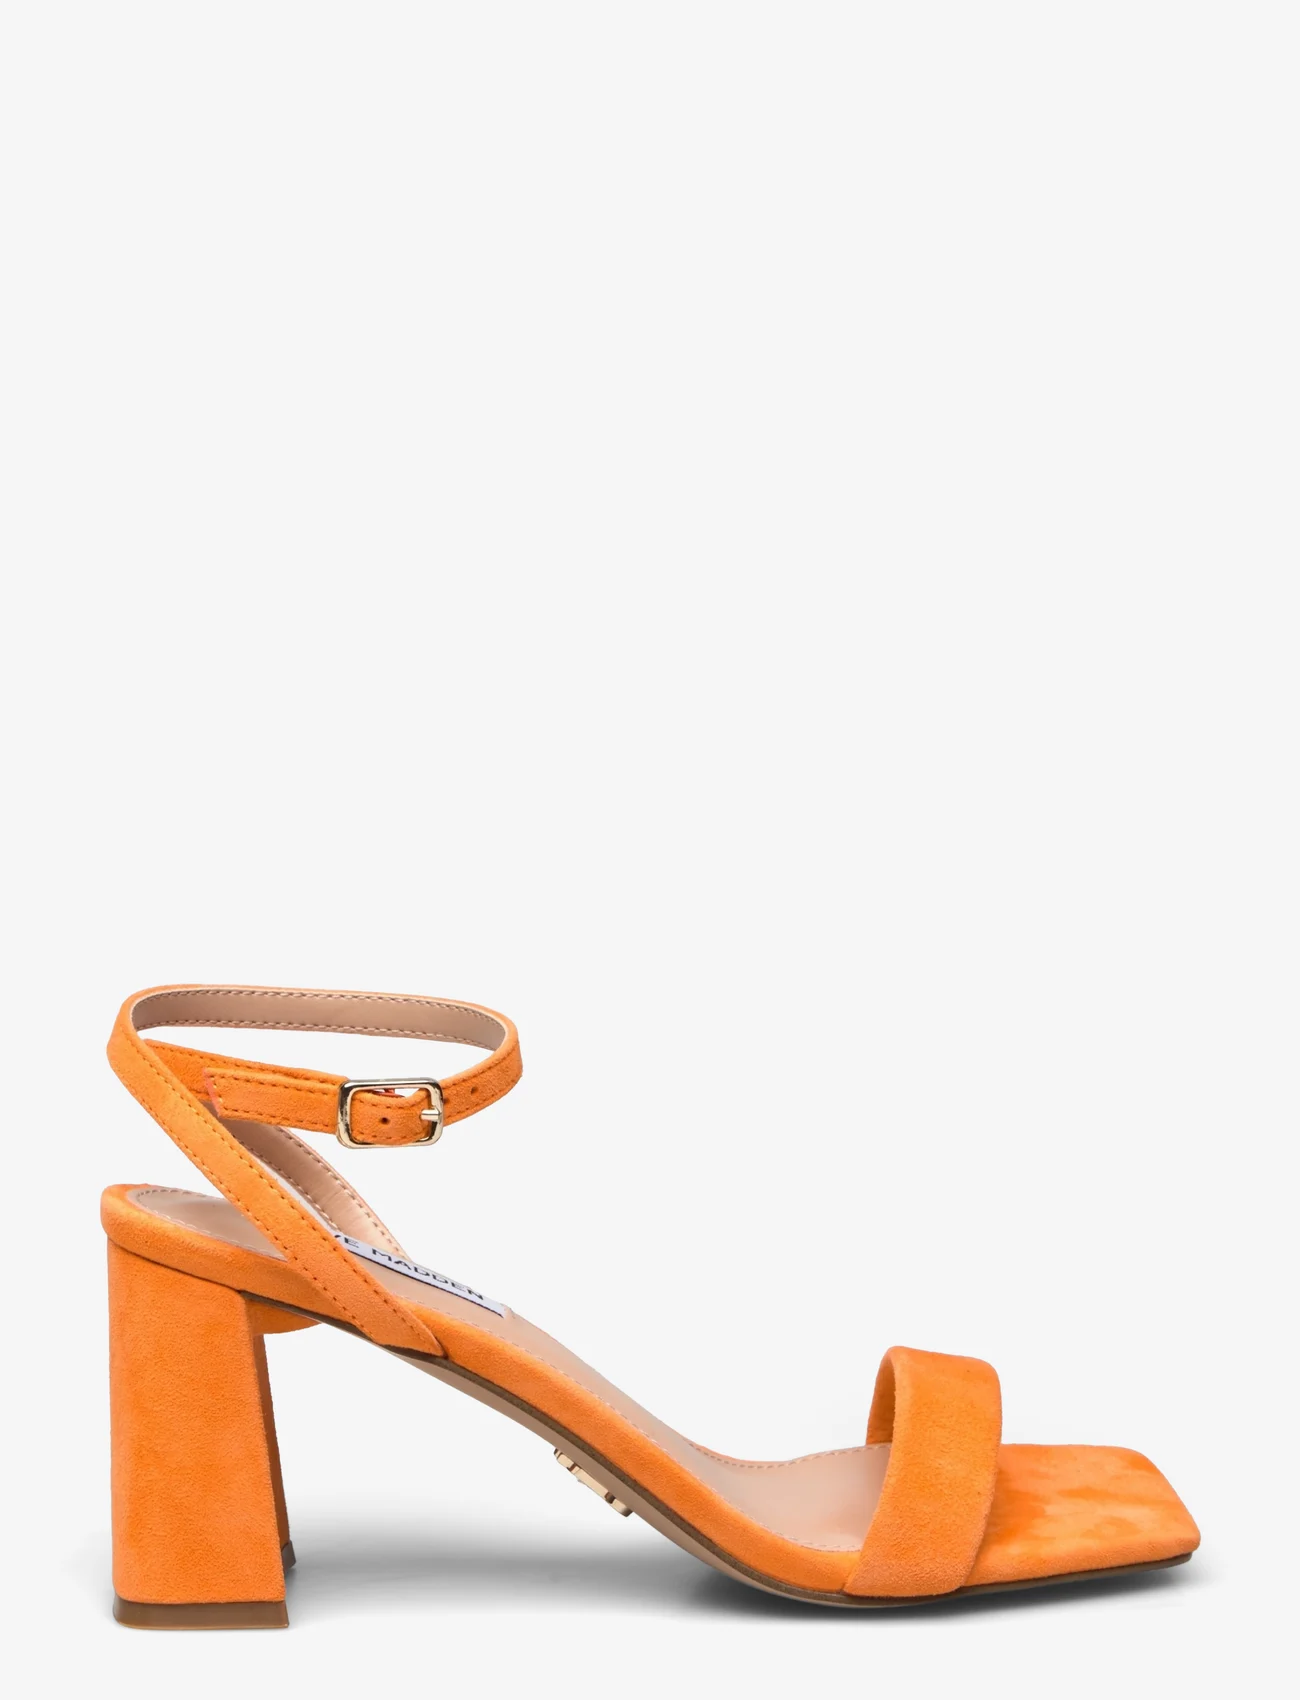 Steve Madden - Luxe Sandal - party wear at outlet prices - orange suede - 1